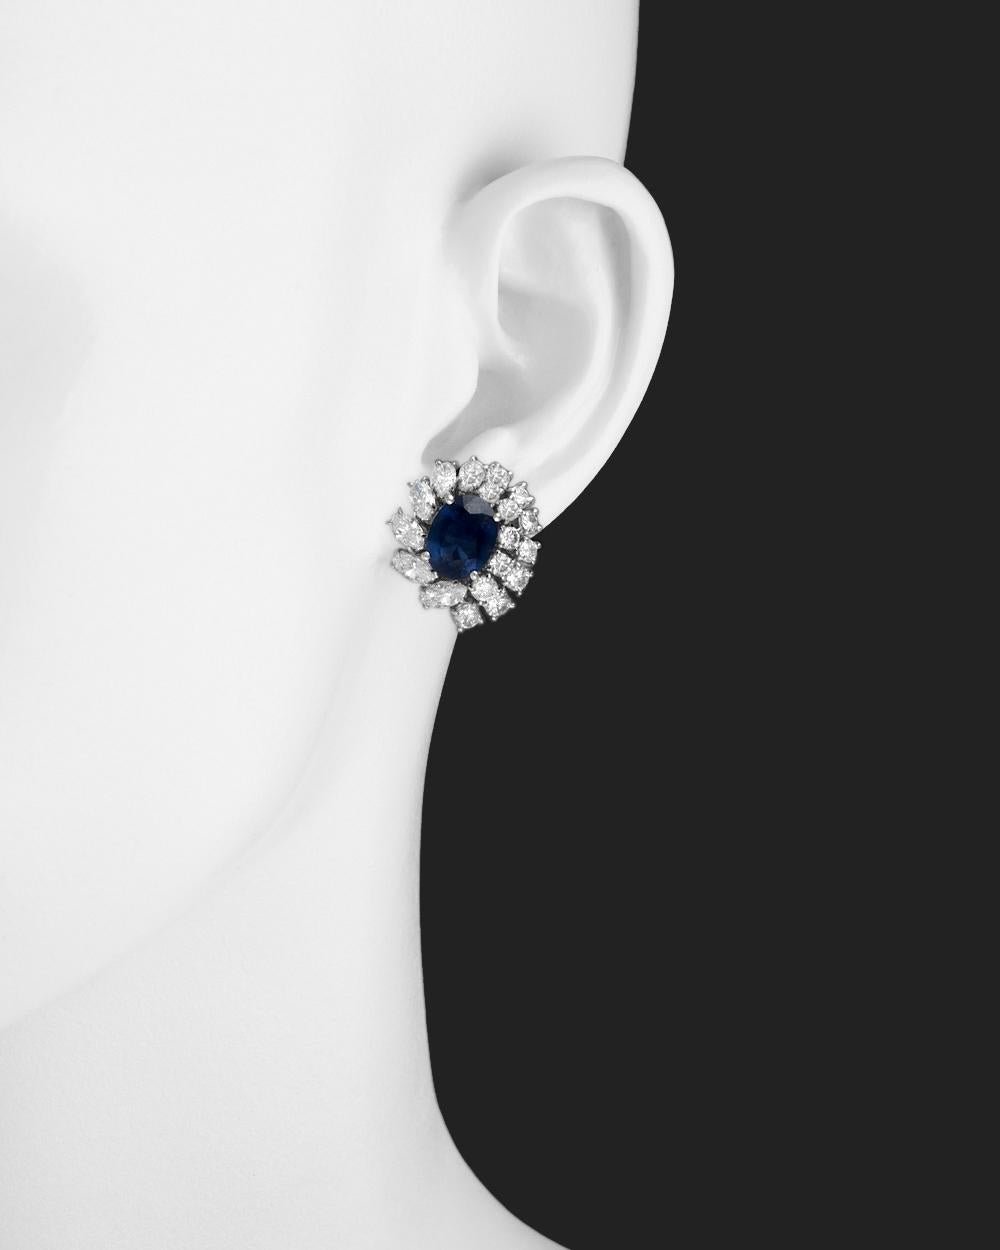 Sapphire and diamond cluster earrings, featuring a larger oval-shaped sapphire accented by round brilliant-cut and marquise-shaped diamonds, in 18k white gold, signed Giovane. Two sapphires weighing approximately 6.65 total carats with diamonds